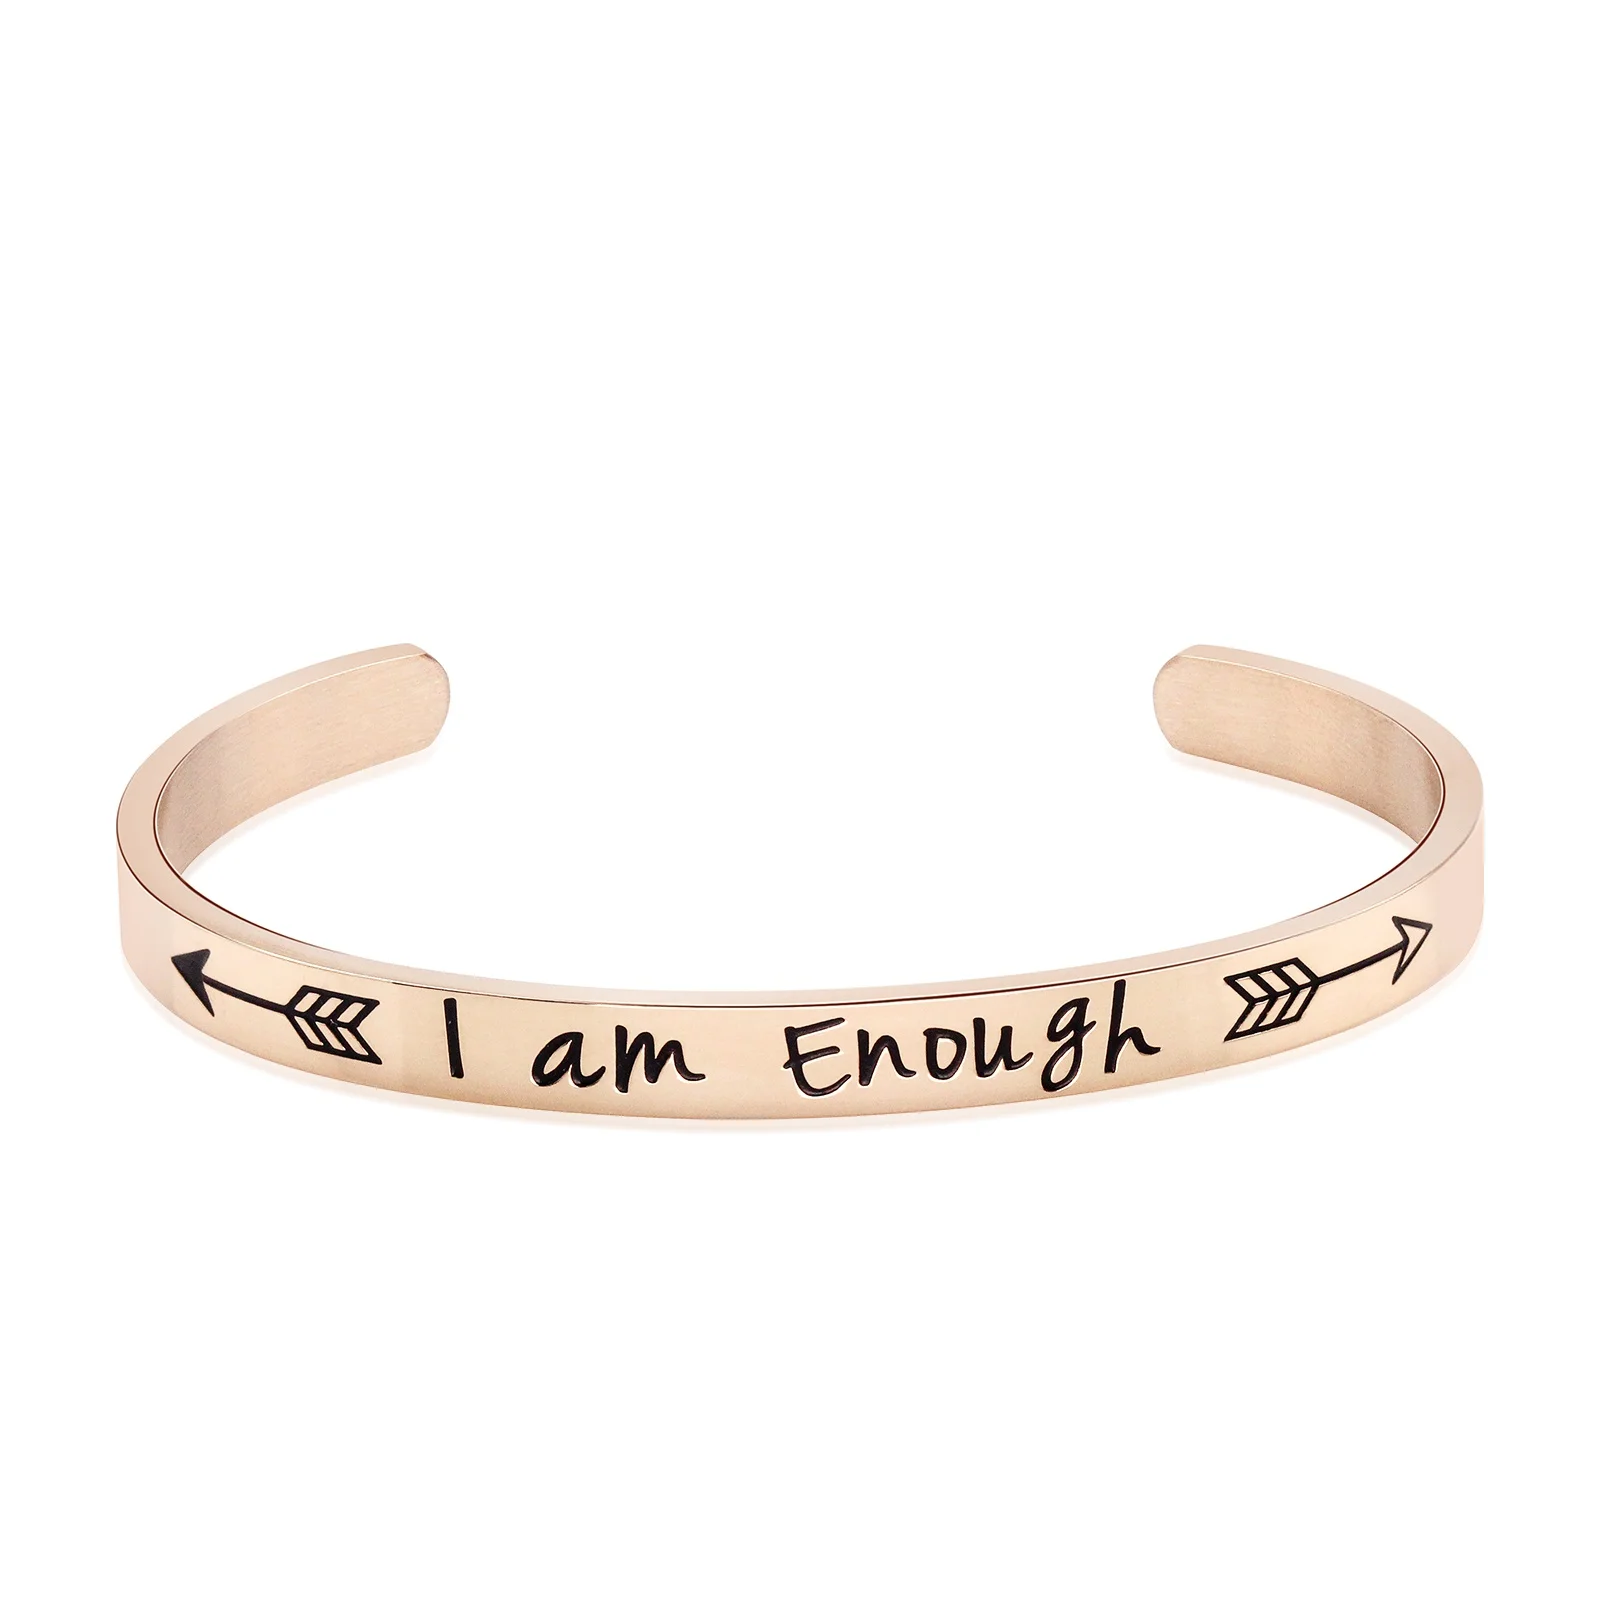 

316L Stainless Steel jewelry Bracelet "I am enough" Engraved Positive Inspirational Quote Cuff Bangle, Steel color/rose gold